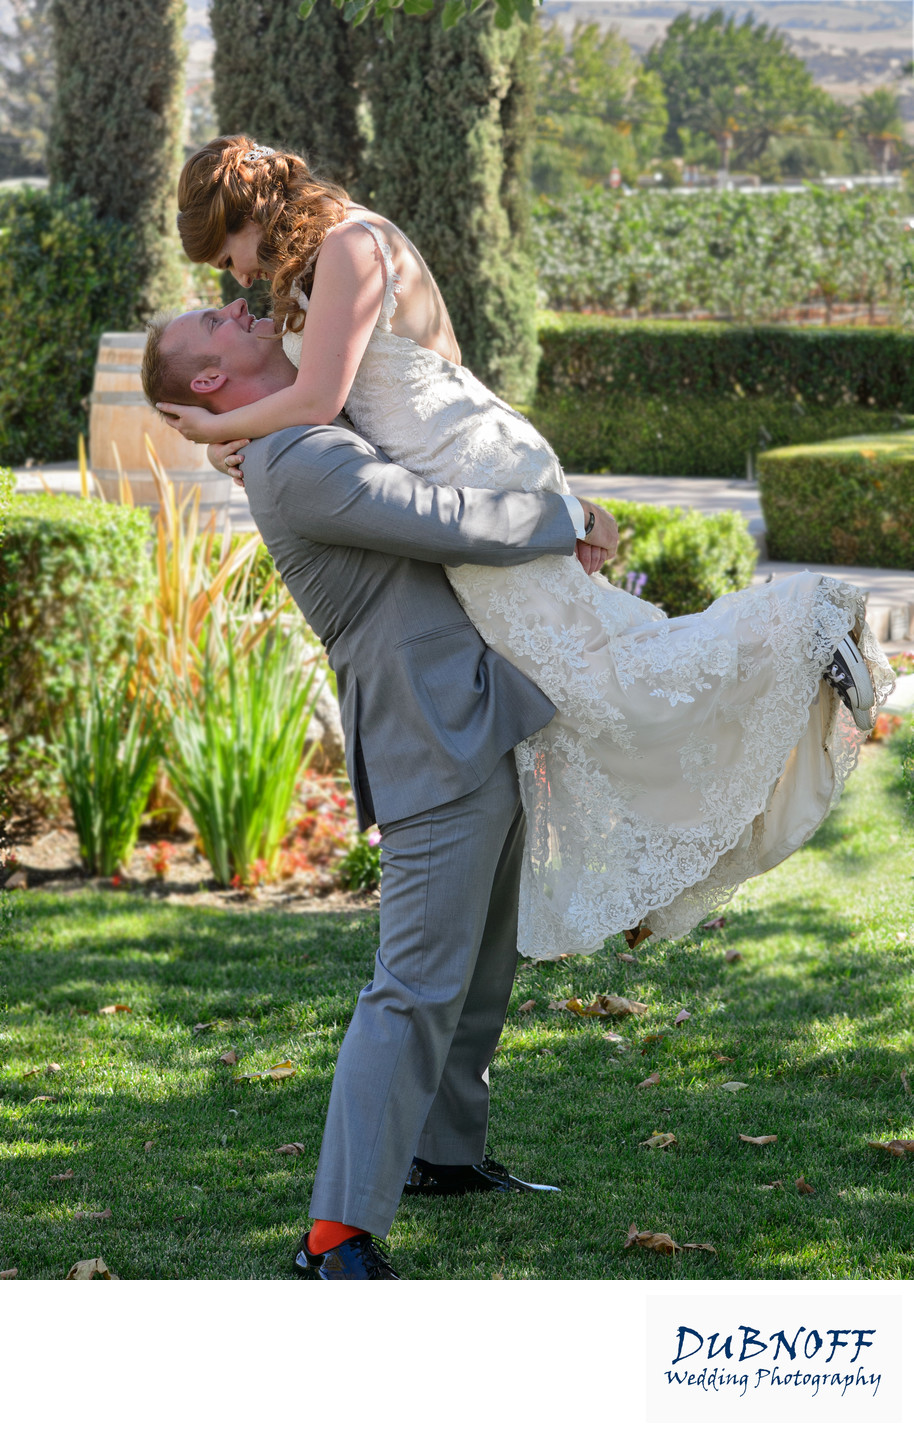 Groom Lifting Bride at Garre Vineyards in Livermore